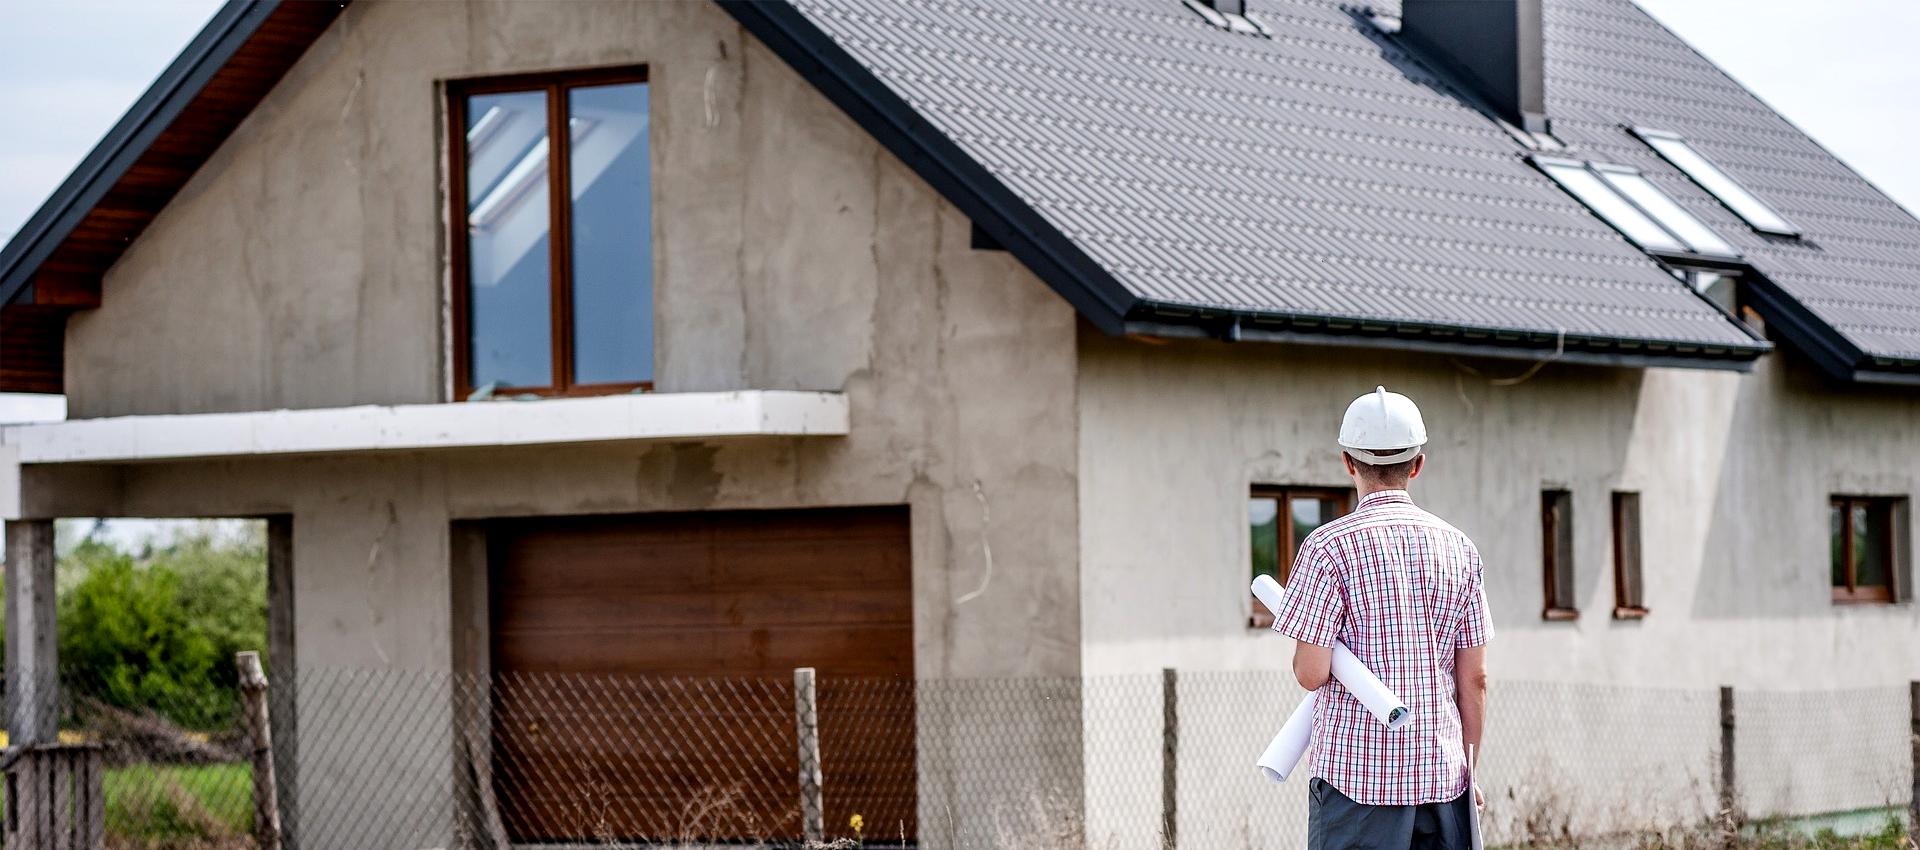 House Building - new builds by McDara Homes, Builders Dublin, Ireland